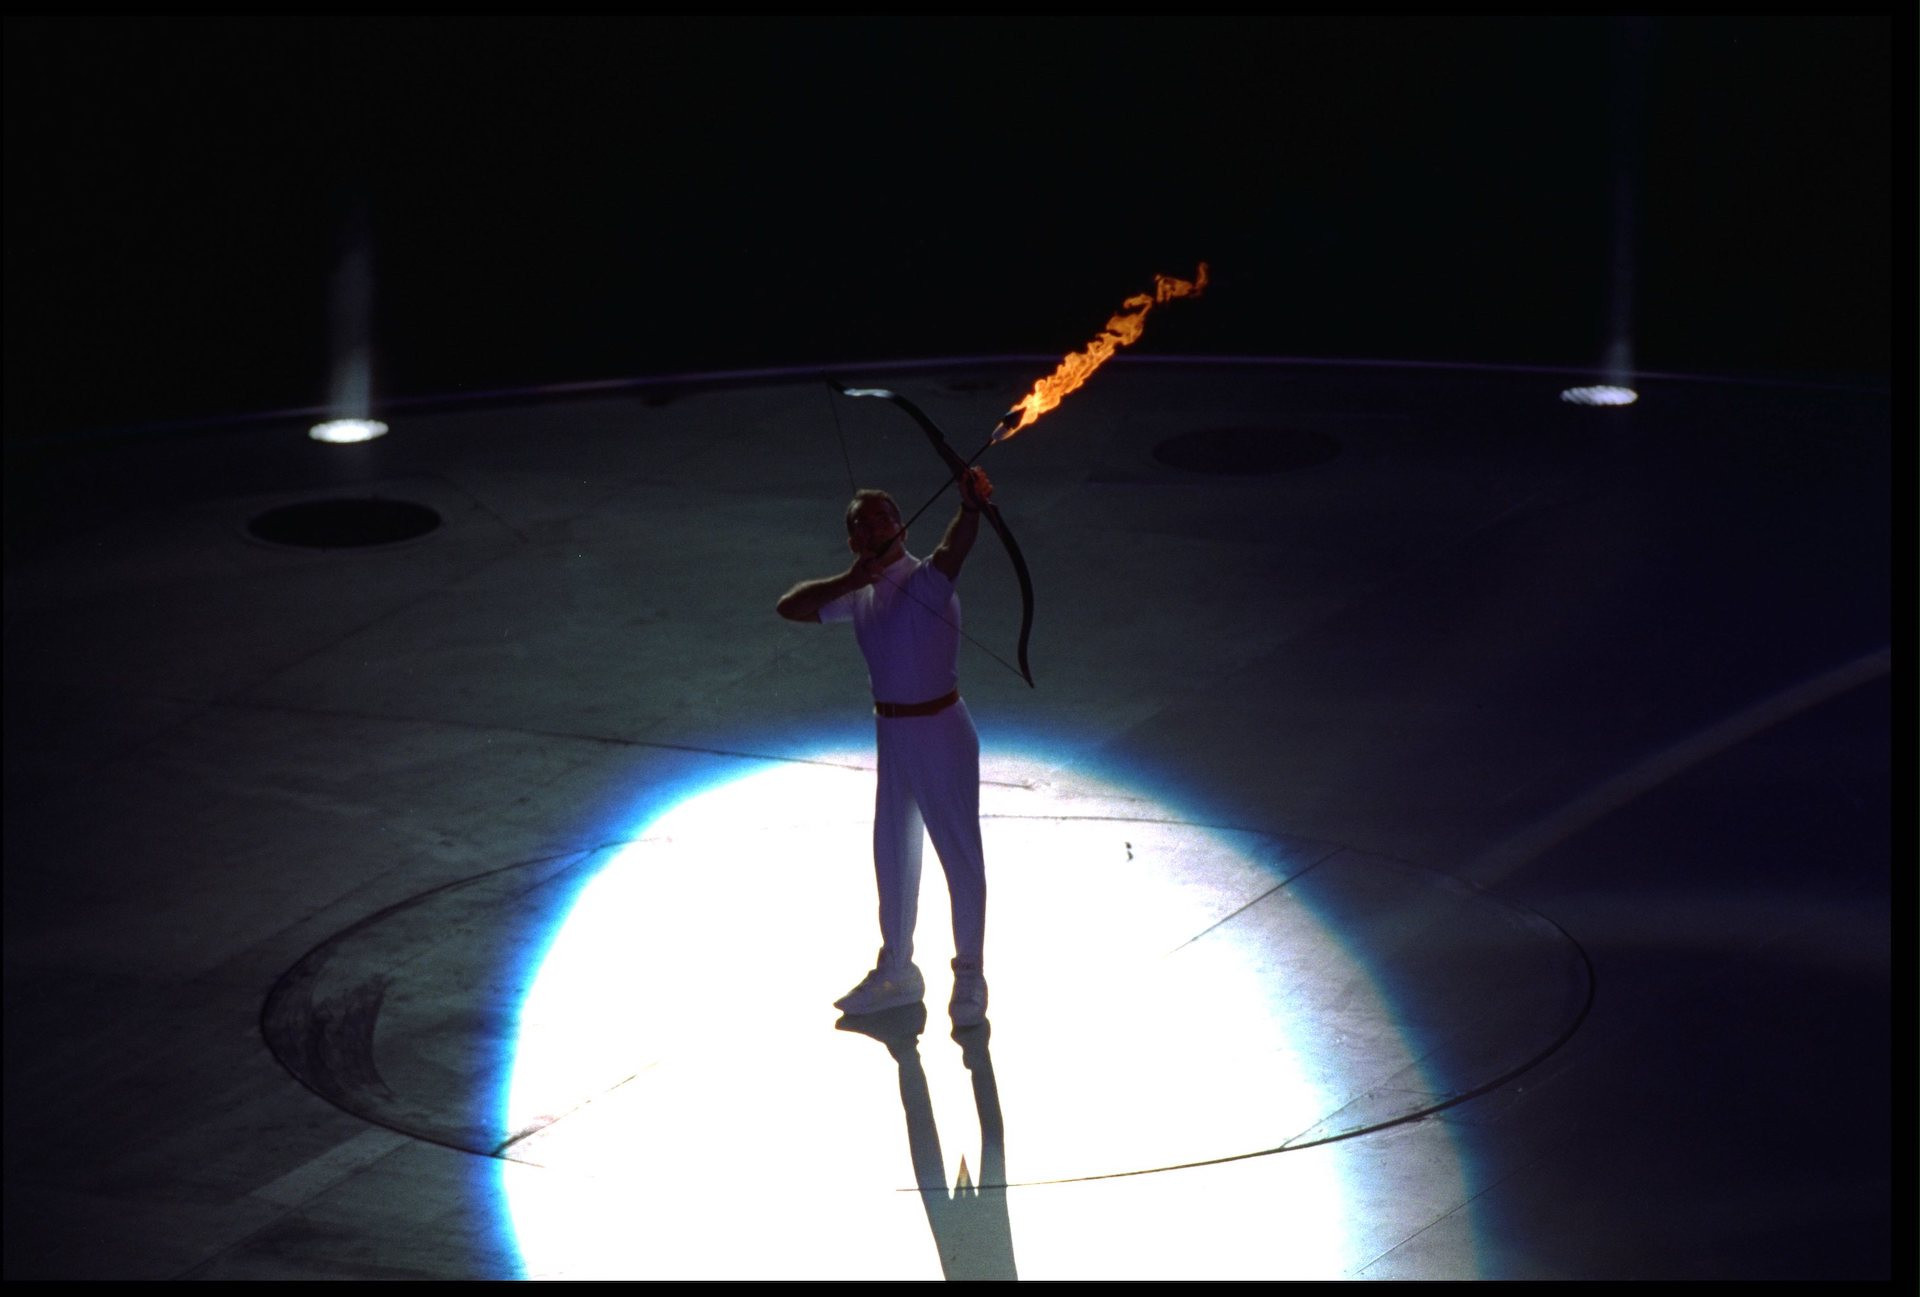 Paralympic archer Antonio Rebollo shooting lit arrow and lighting flame at Olympic Stadium, Barcelona, Spain. GETTY IMAGES